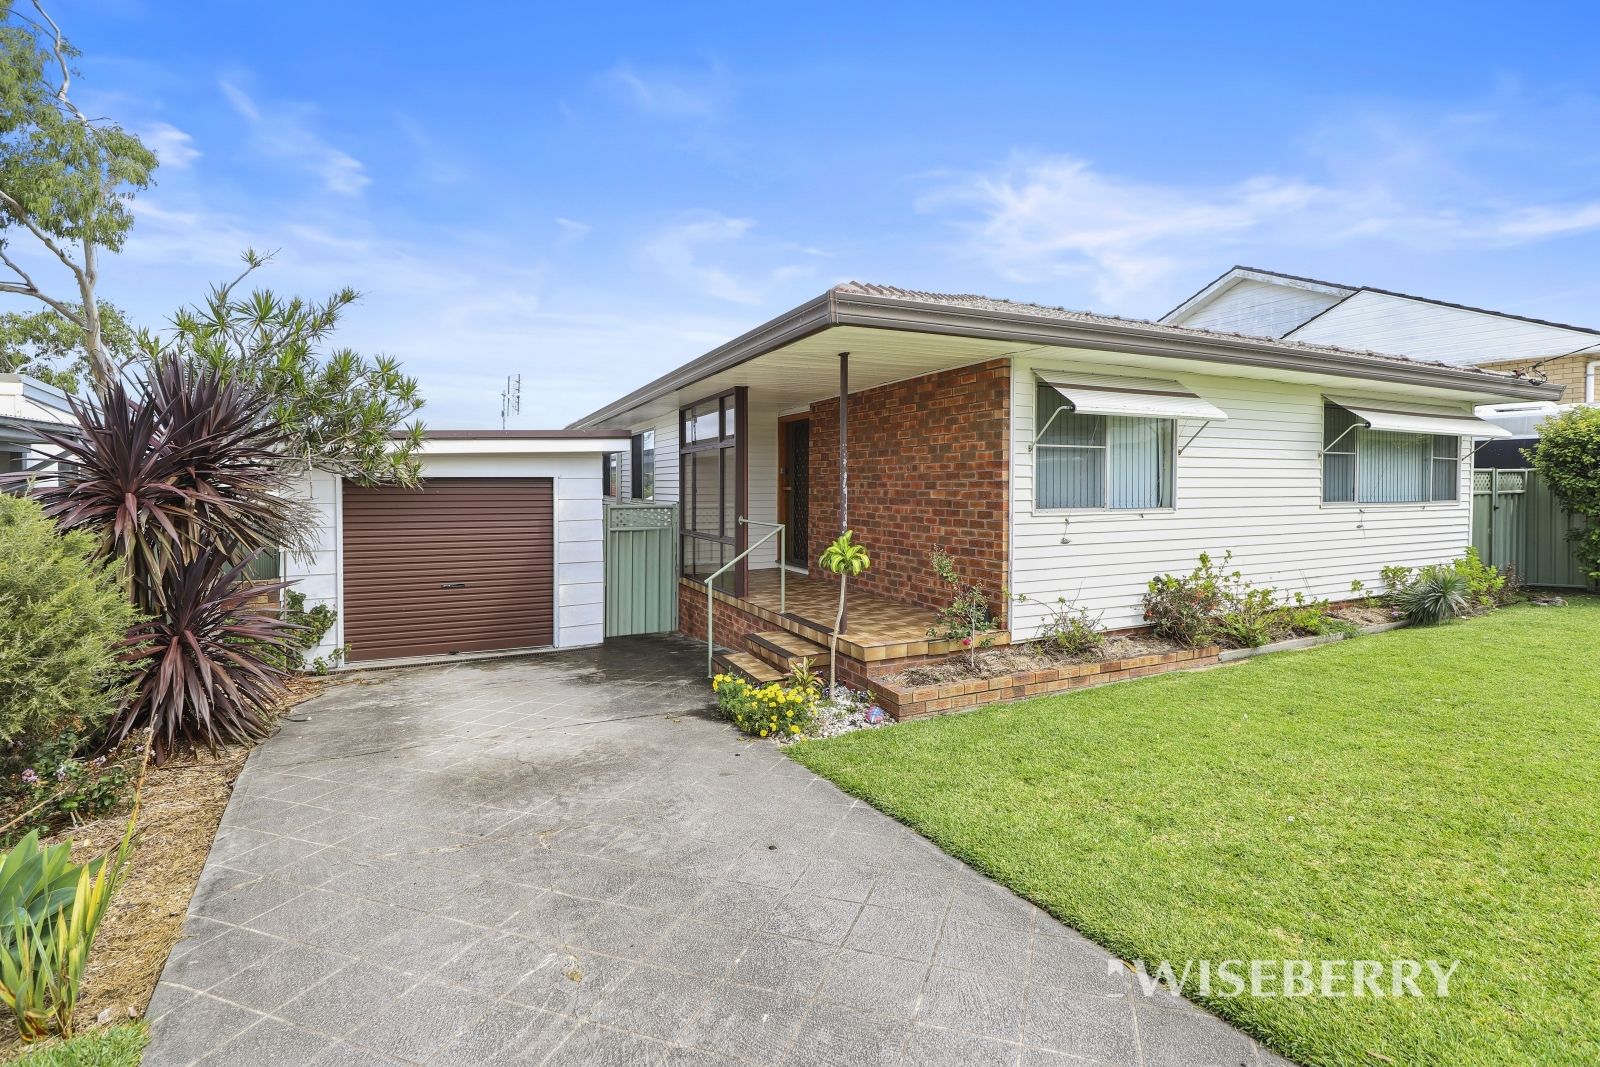 3 bedrooms House in 21 Marmion St MANNERING PARK NSW, 2259